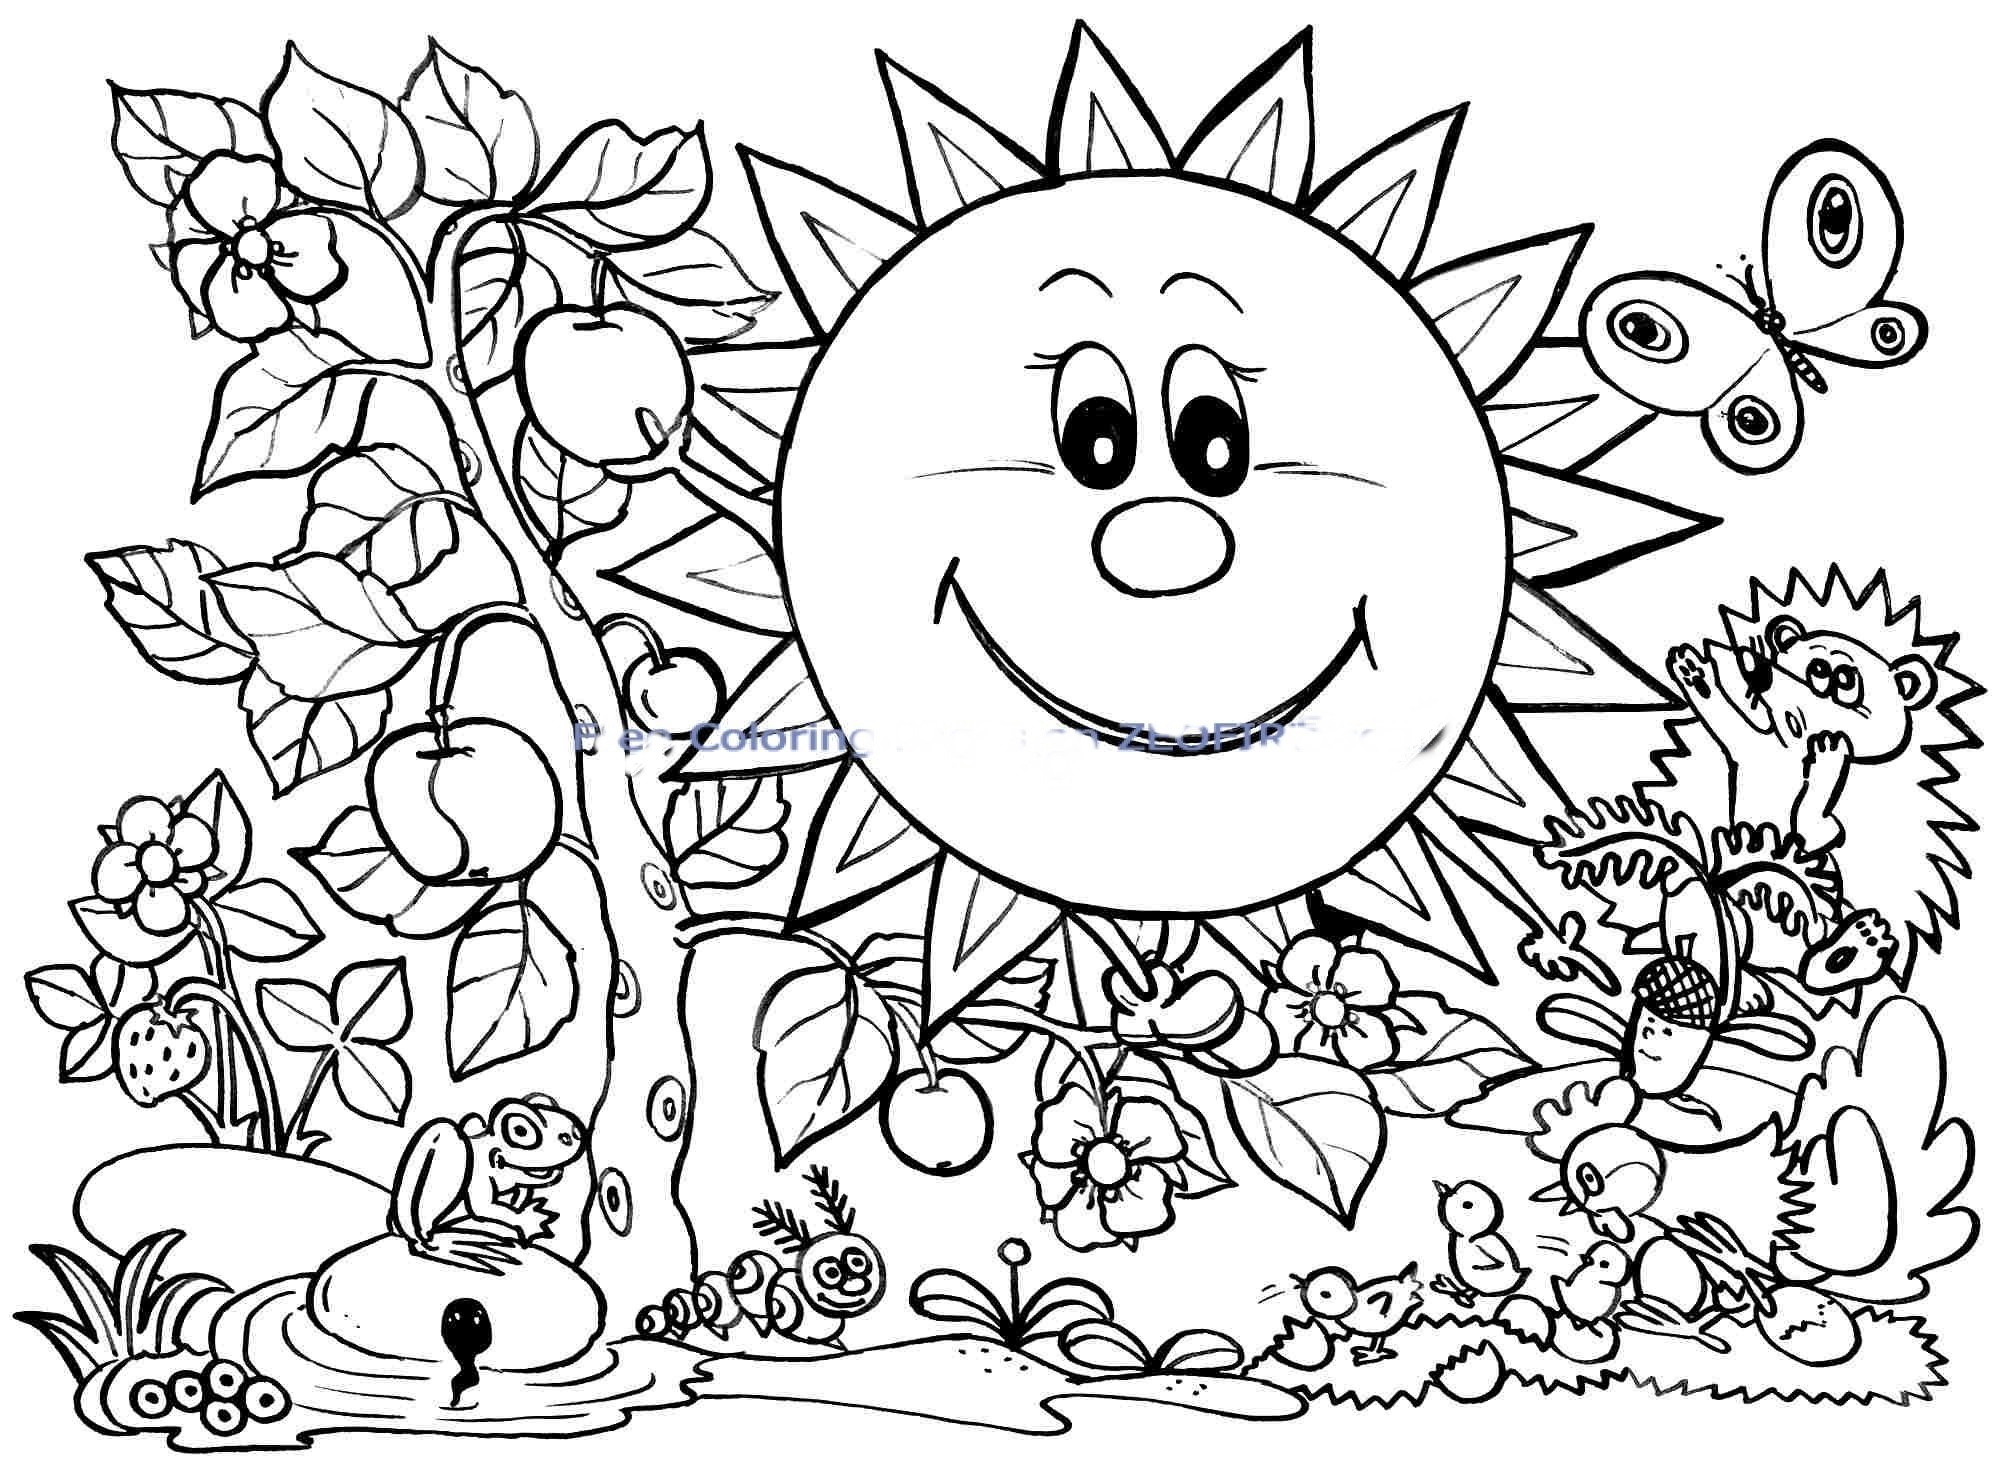 Coloring Book : Coloring Book Stunning Free Printable Spring Pages - Free Printable Spring Pictures To Color